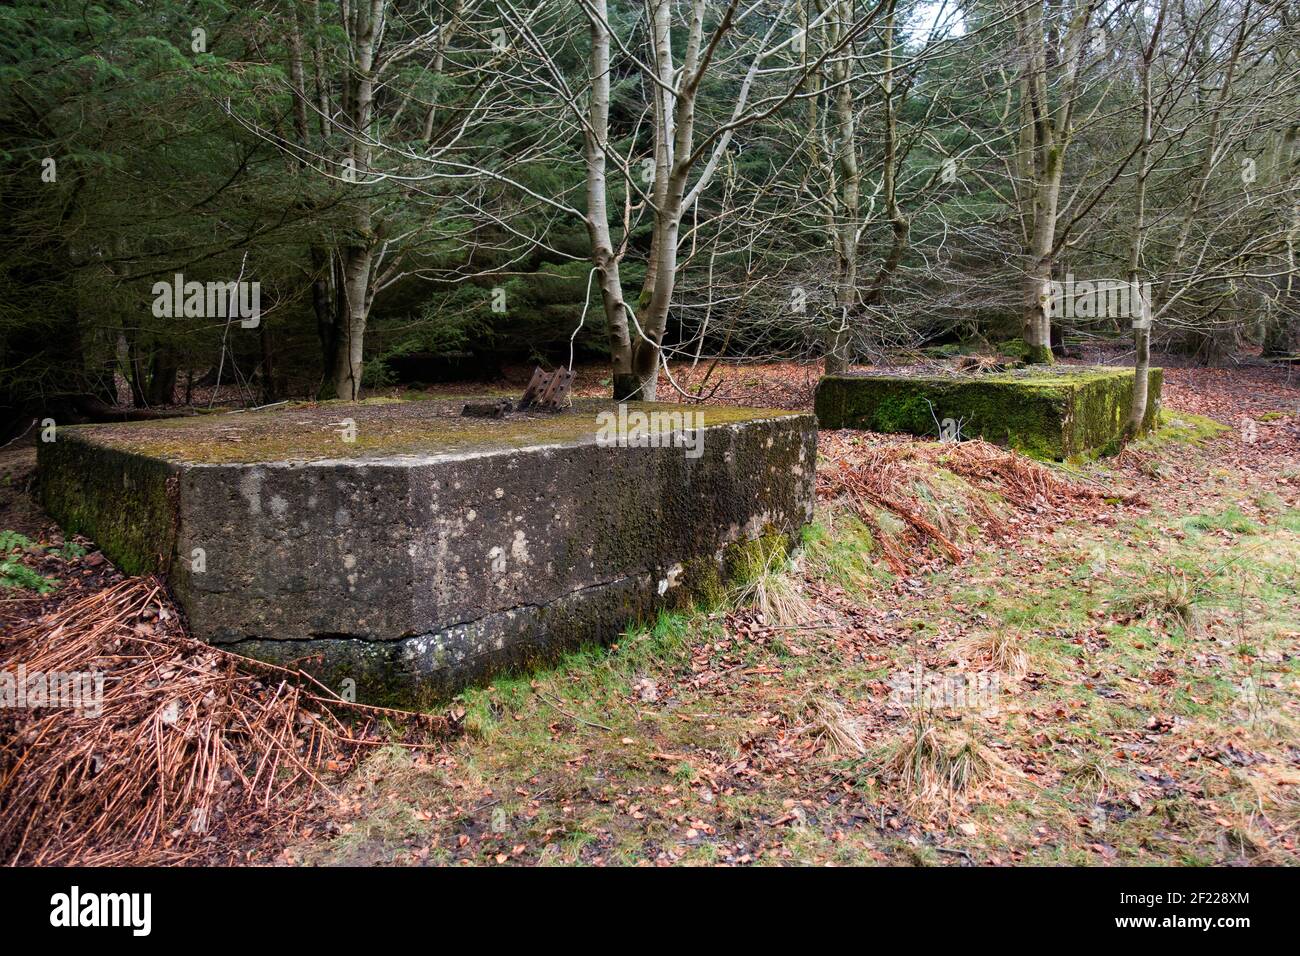 Old concrete airship moorings at the site of Longside Naval Airship Station, built in 1915, at Lenabo Woods near Longside, Aberdeenshire, Scotland Stock Photo